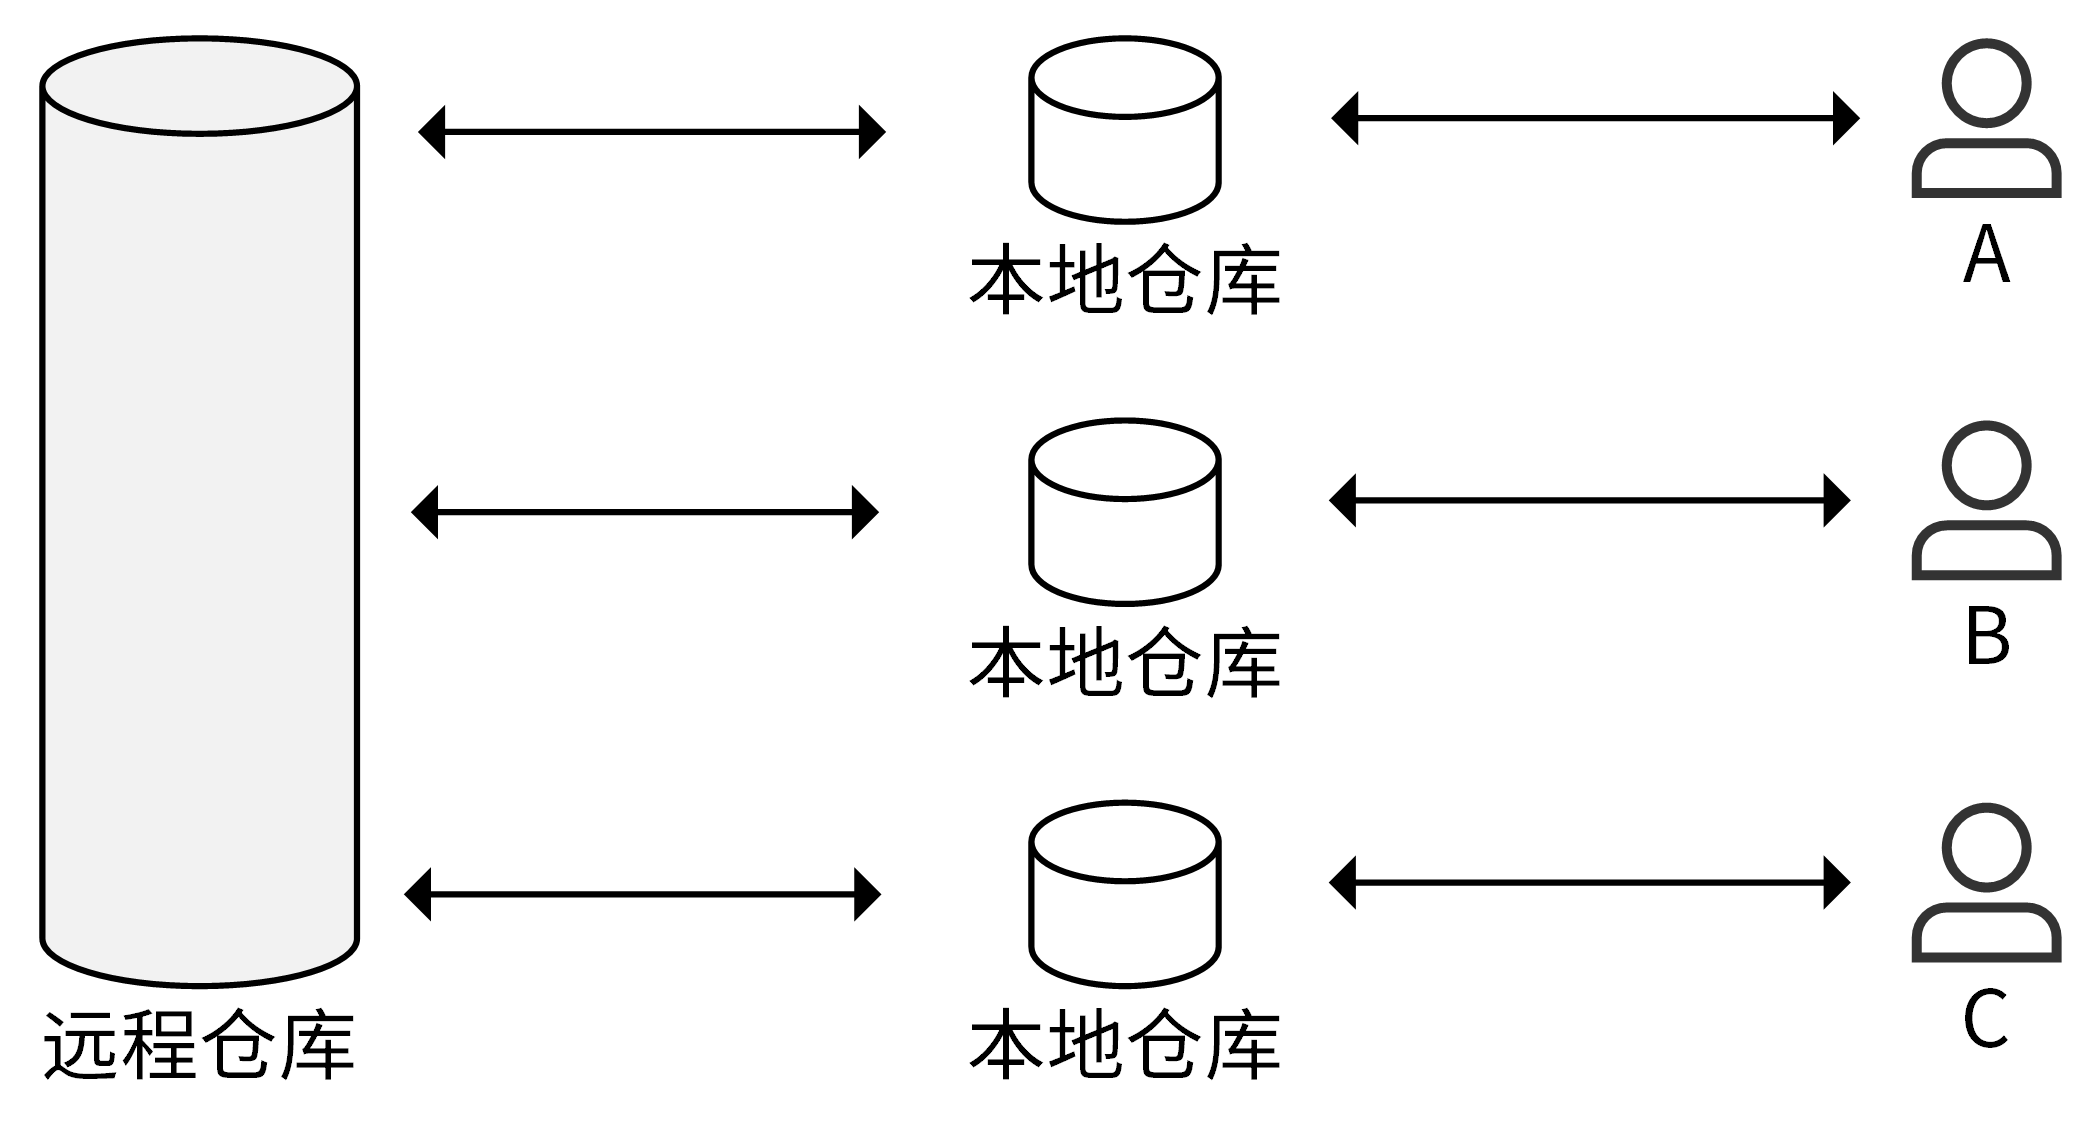 https://img.zhaoweiguo.com/knowledge/images/soft-engineerings/standard-flow1-simple1.png